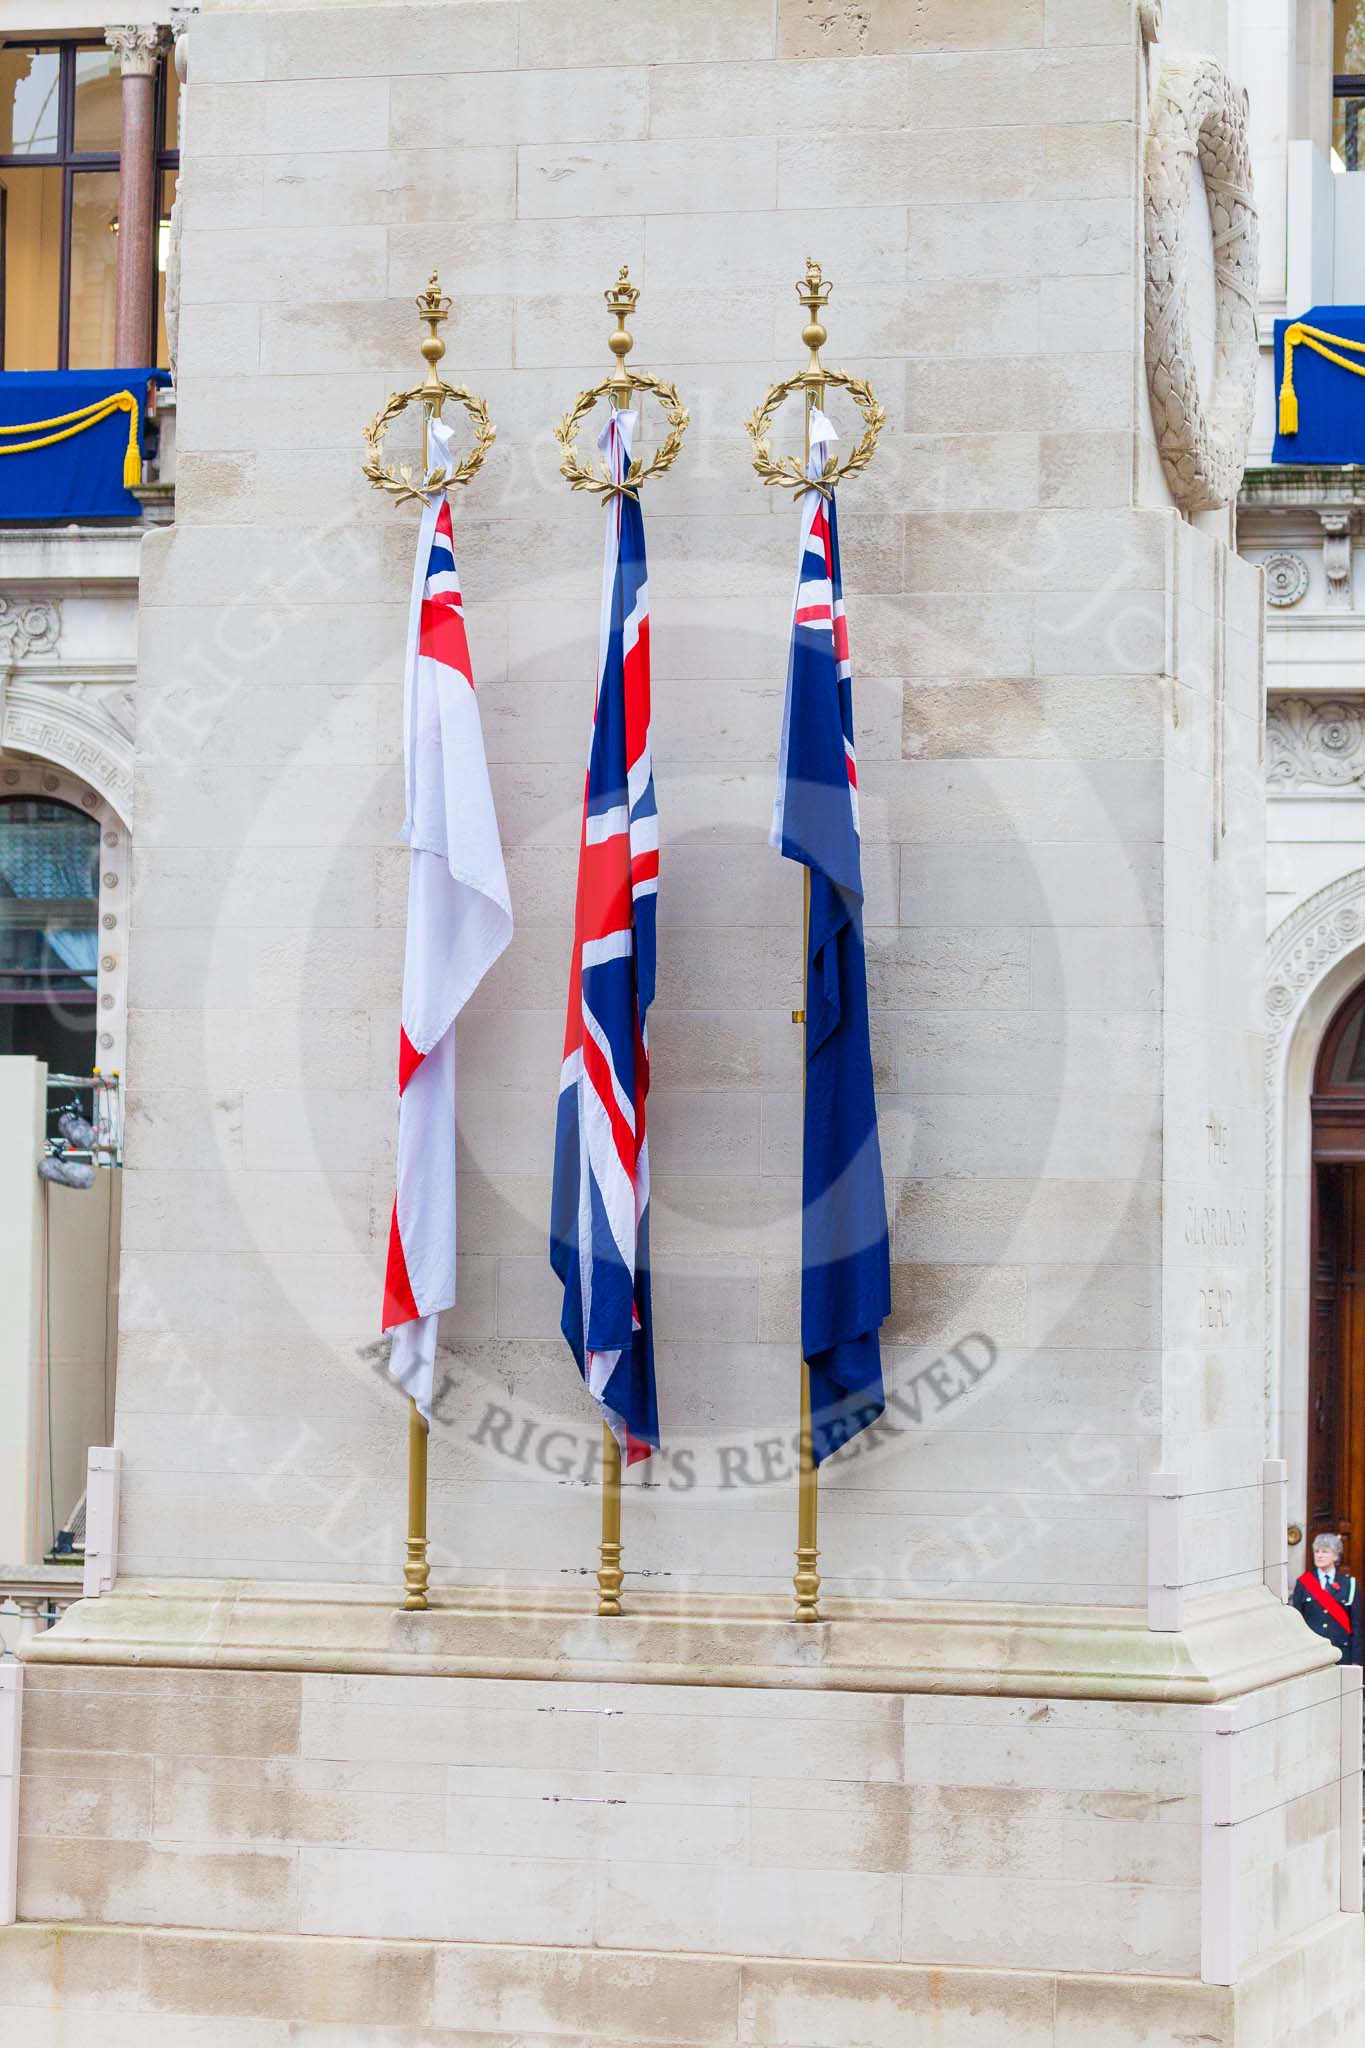 Remembrance Sunday at the Cenotaph 2015: The Cenotaph in the morning of Remembrance Sunday 2015. The tree flags represent the Royal Navy, the British Army, the Royal Air Force, and the Merchant Navy. Image #2, 08 November 2015 08:20 Whitehall, London, UK